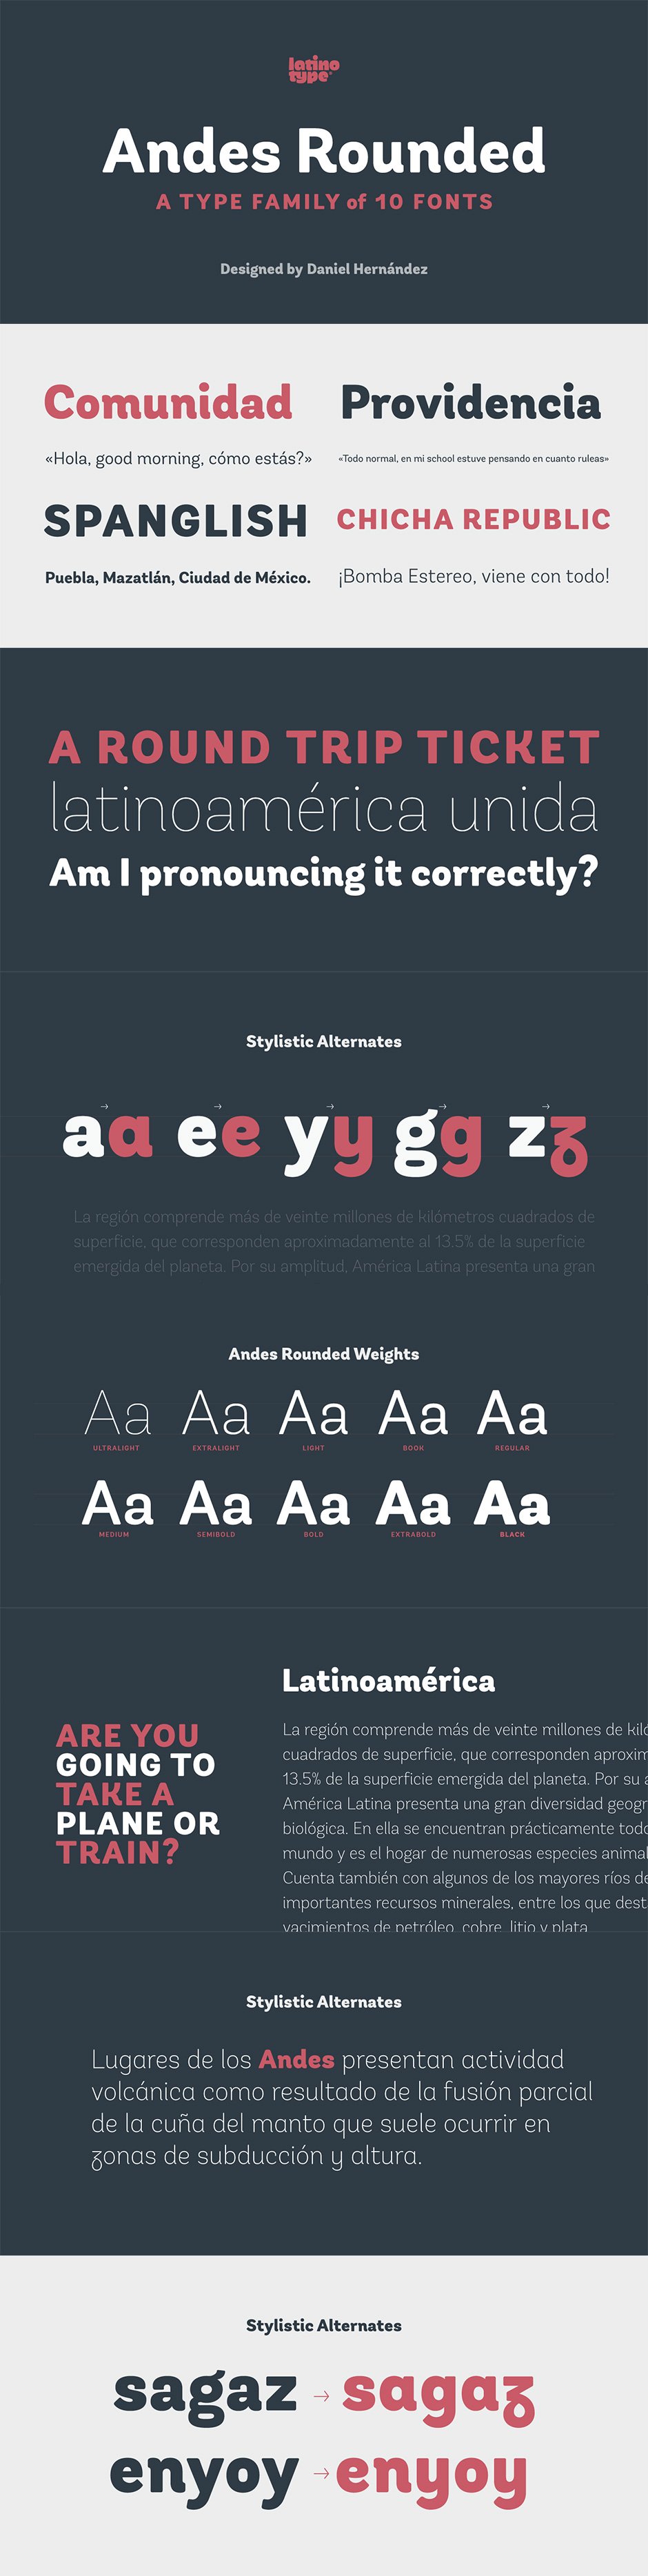 20 Best Selling Creative Fonts